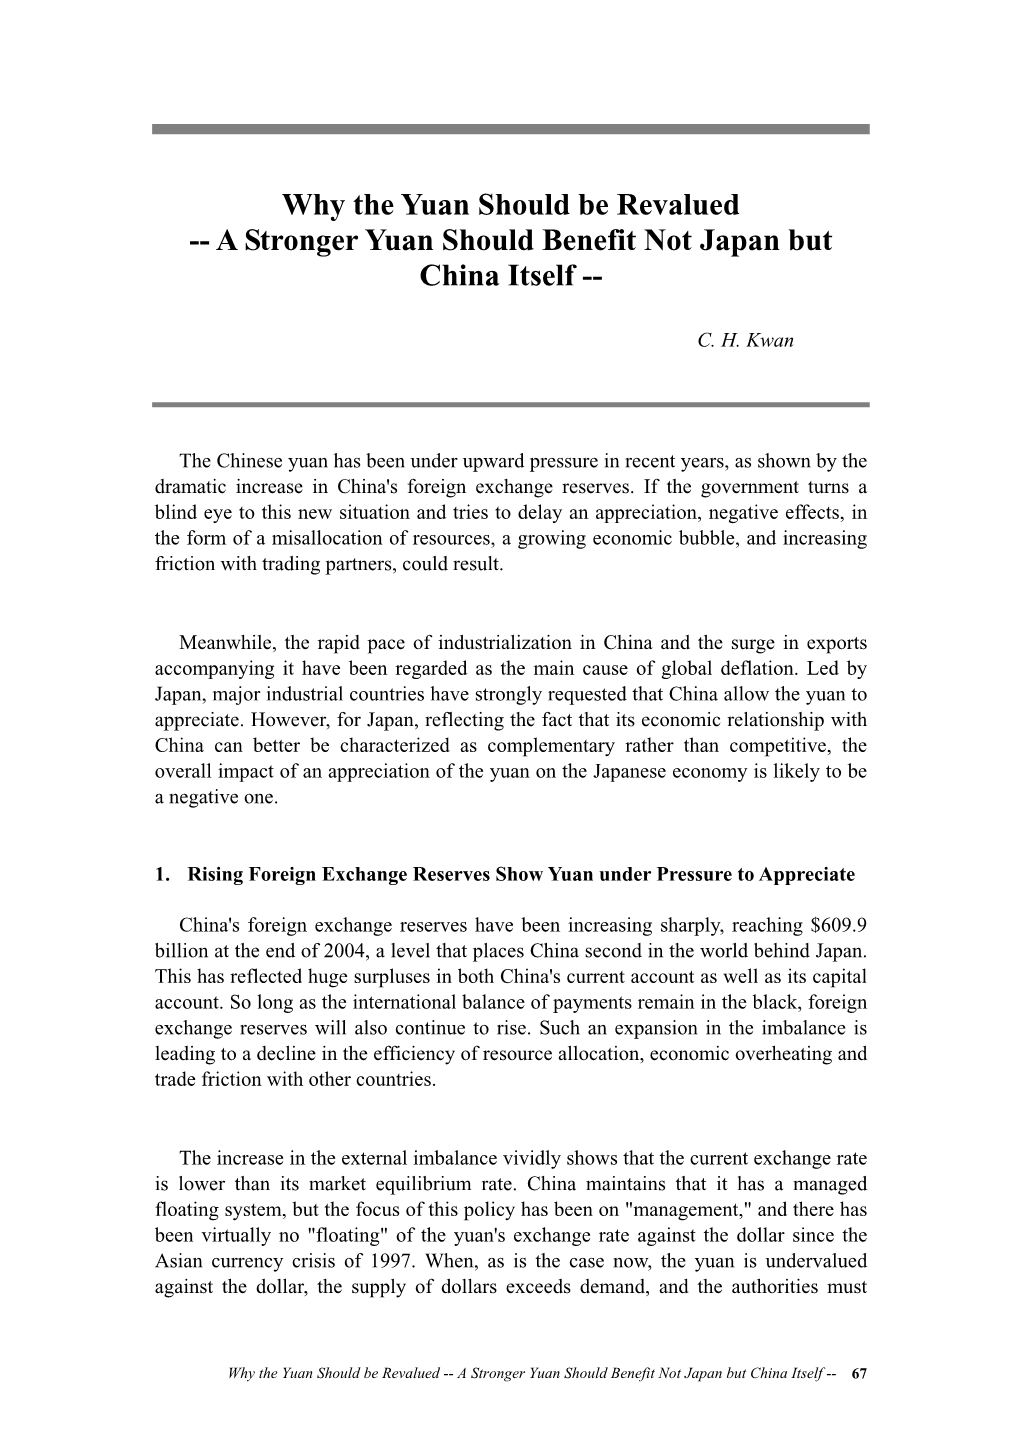 Why the Yuan Should Be Revalued (PDF)